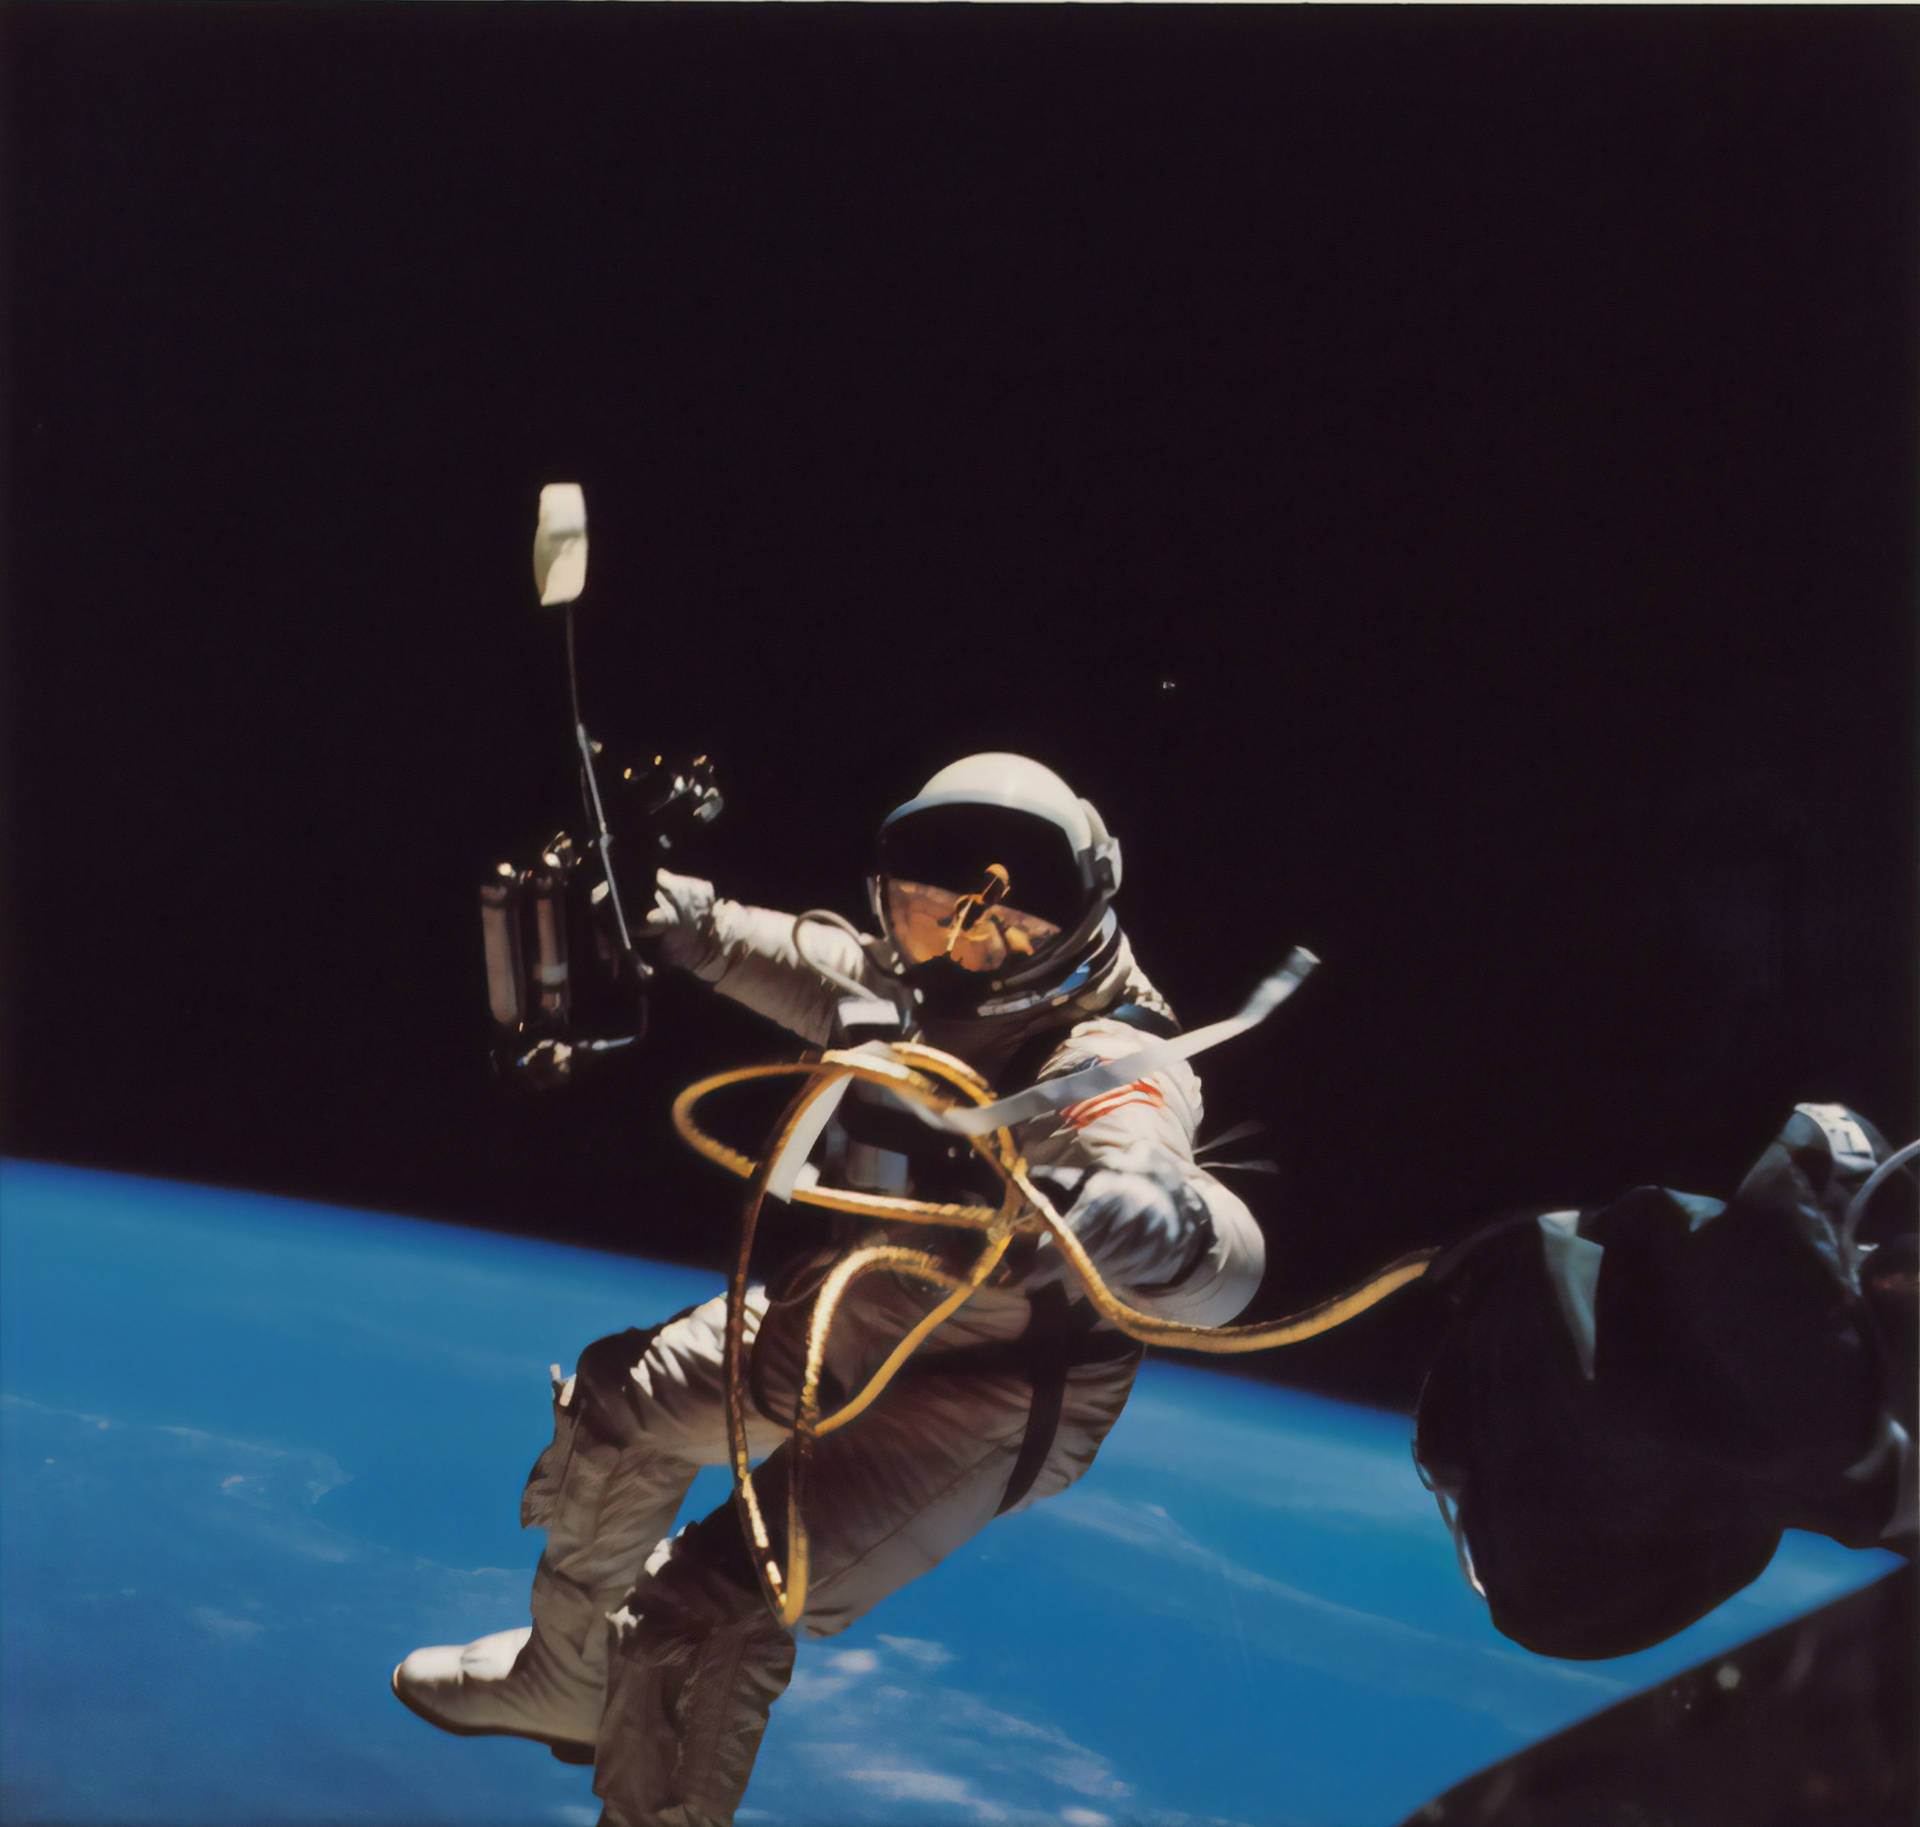 Astronaut In Space Holding Space Tools Wallpaper